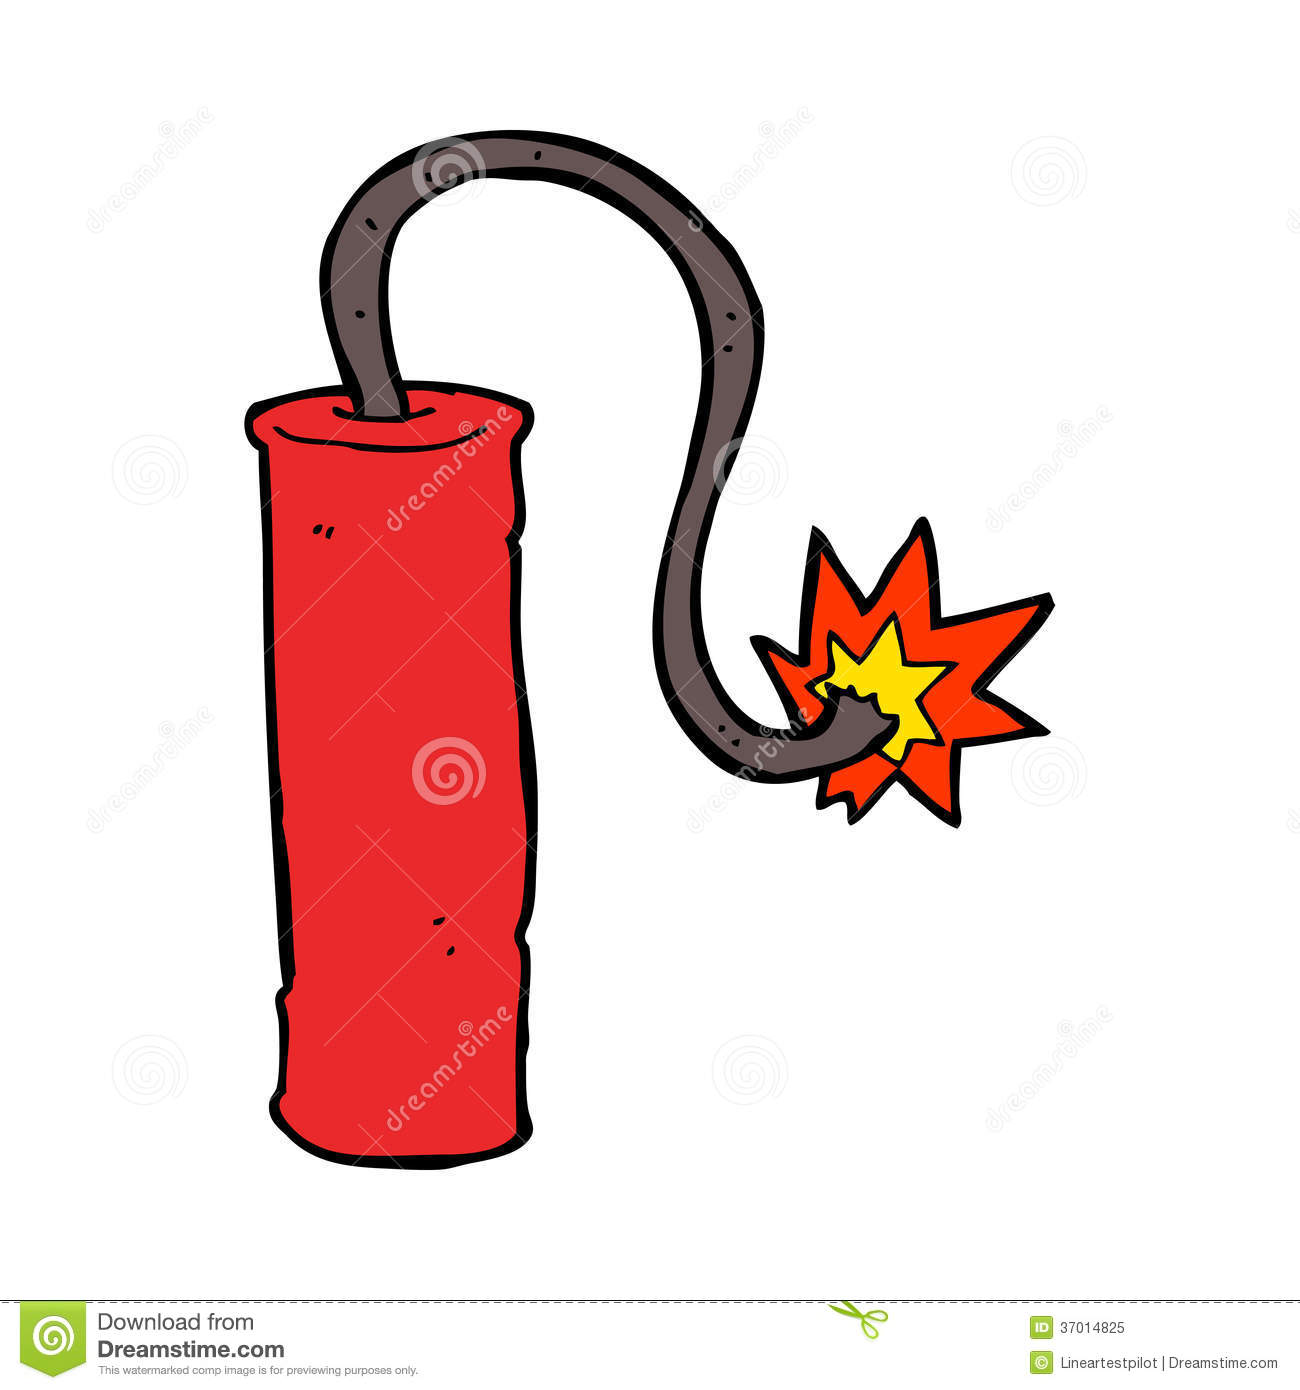 Animated dynamite clip art - Dynamite Clipart